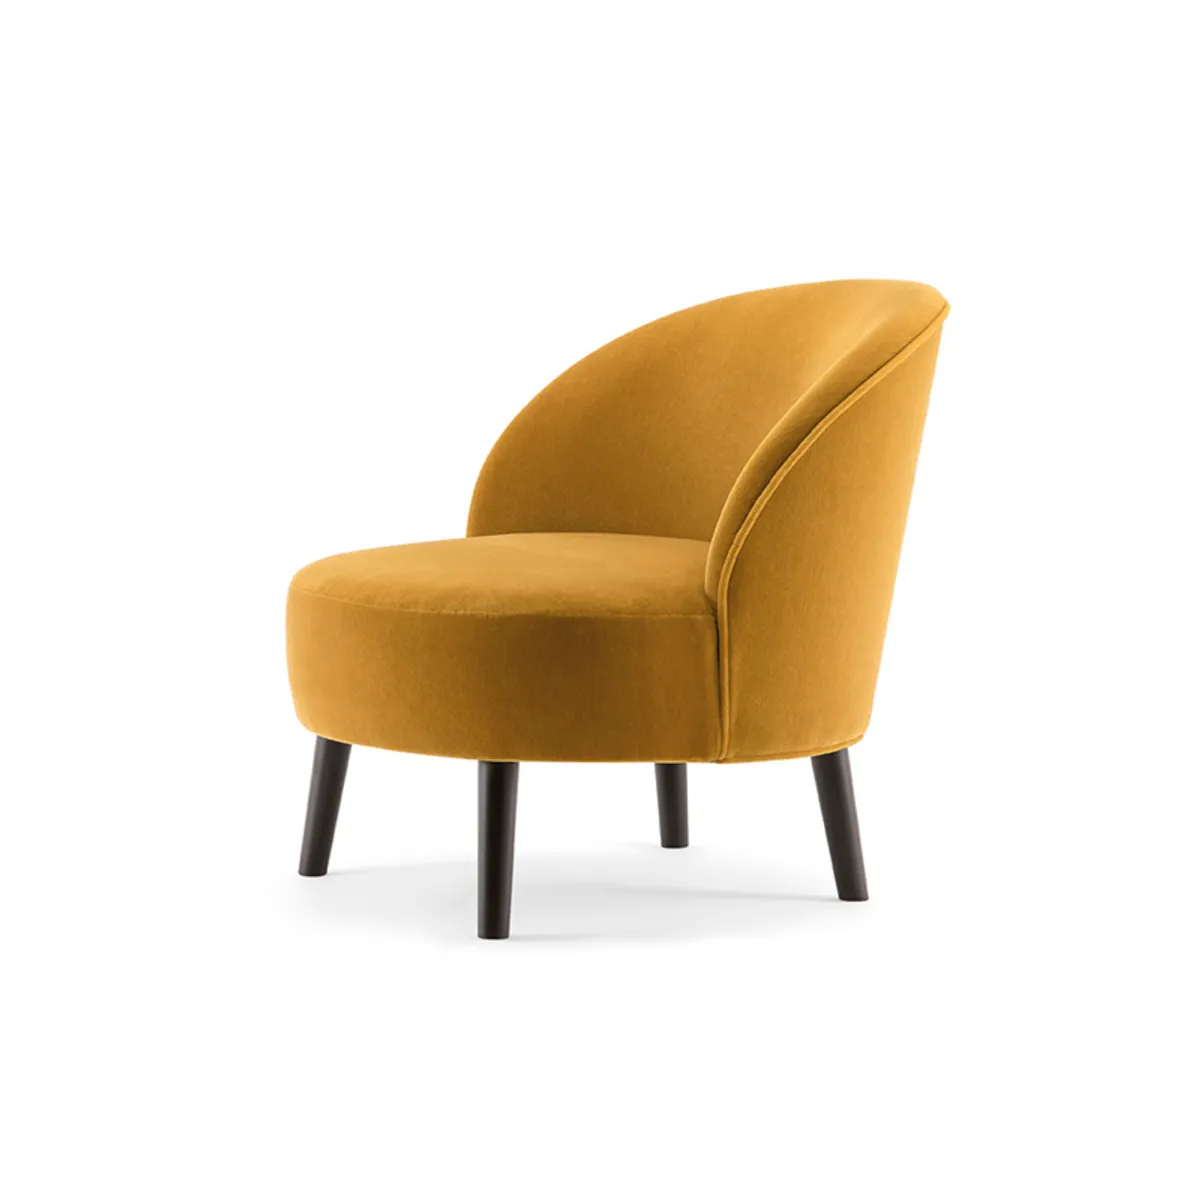 Shirley Lounge Chair Yellow Upholstery And Wooden Legs Insideoutcontracts 5